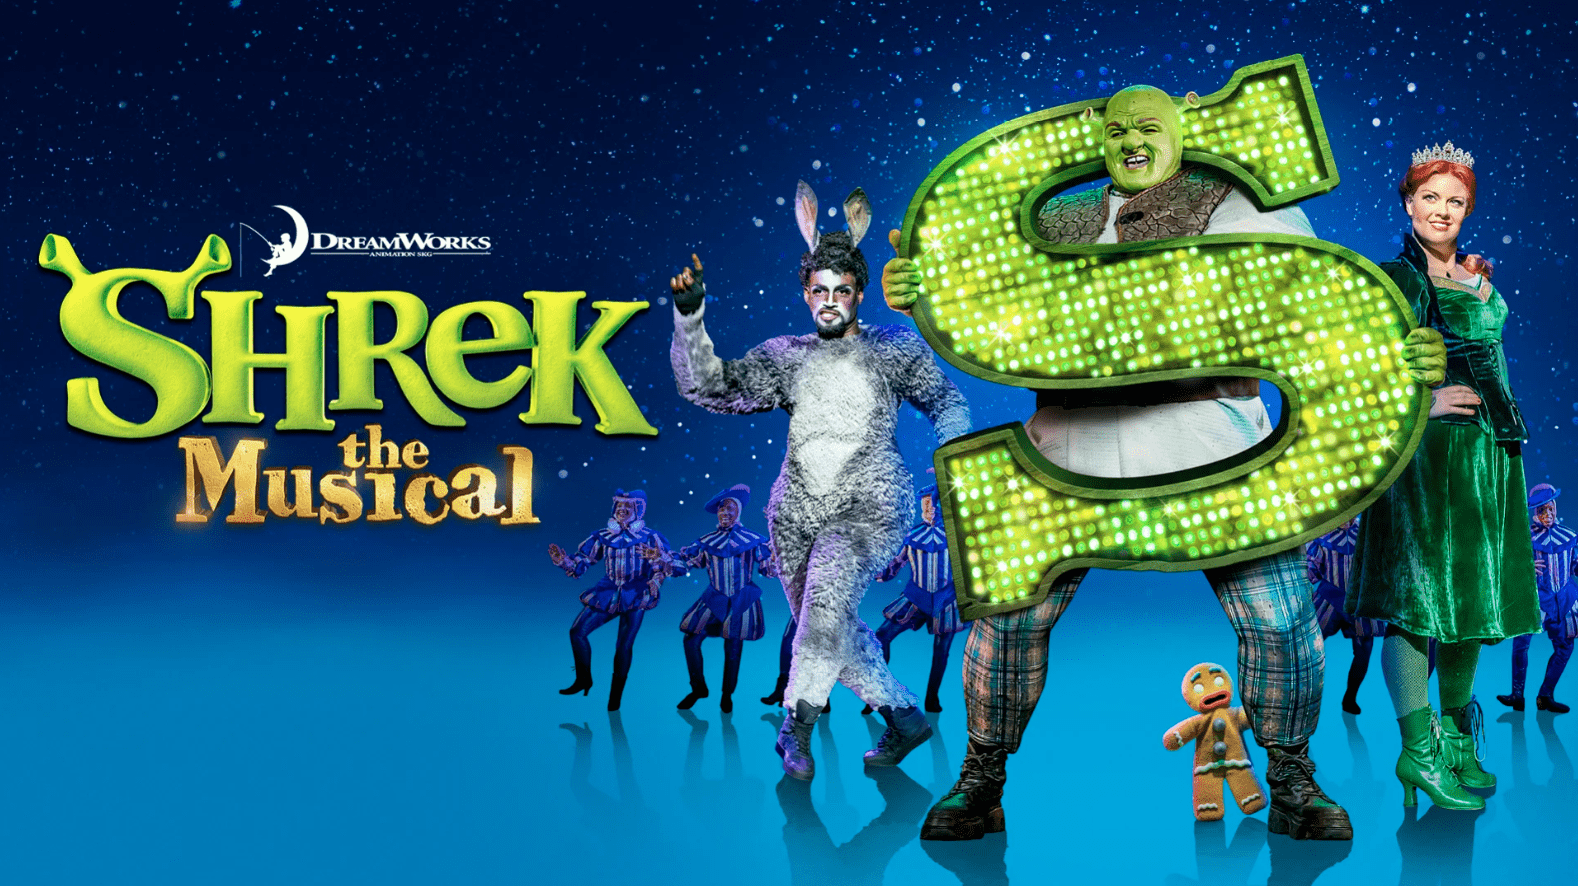 Join Shrek and his trusty sidekick Donkey as they set out on a quest to defeat the fearsome dragon and rescue the beautiful Princess Fiona.